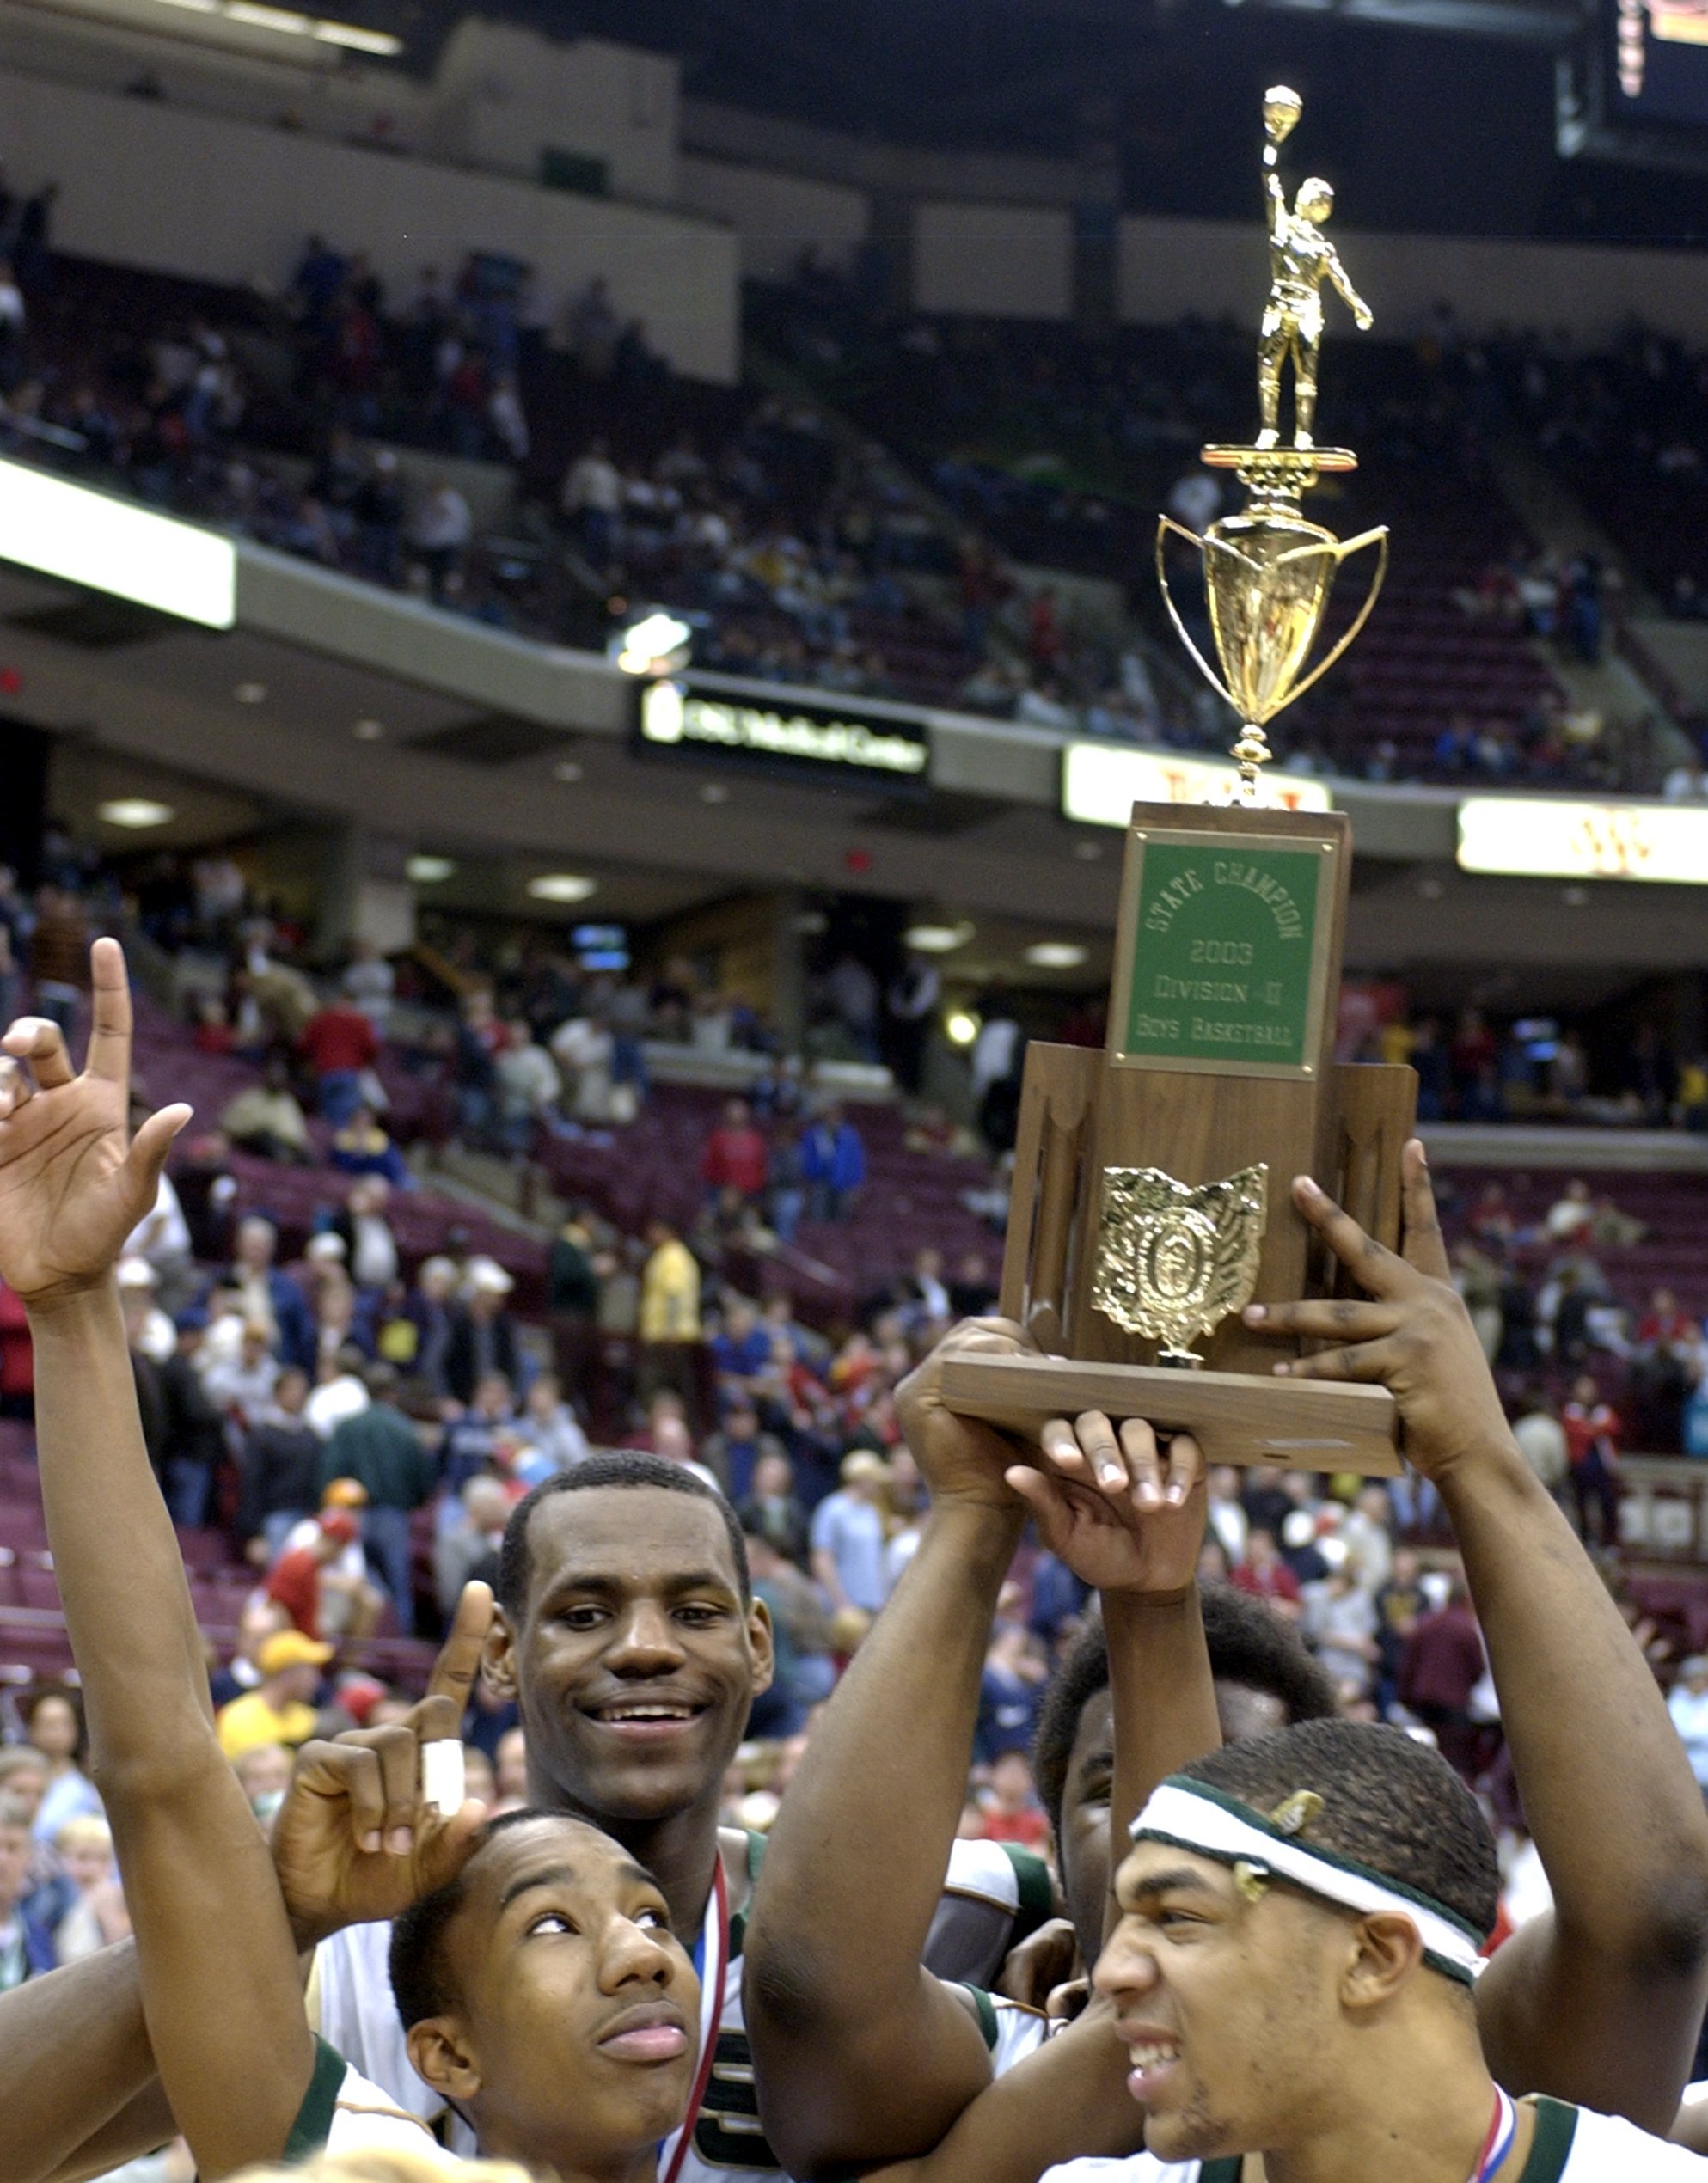 Celebrating their victory at the State Championships St. Vincent-St. Mary players LeBron James(back left), Sean Cotton(back right) Dru Joyce(left front) and Romeo Travis(right front) hold the 1st place trophy overhead.(Roadell Hickman/The Plain Dealer)